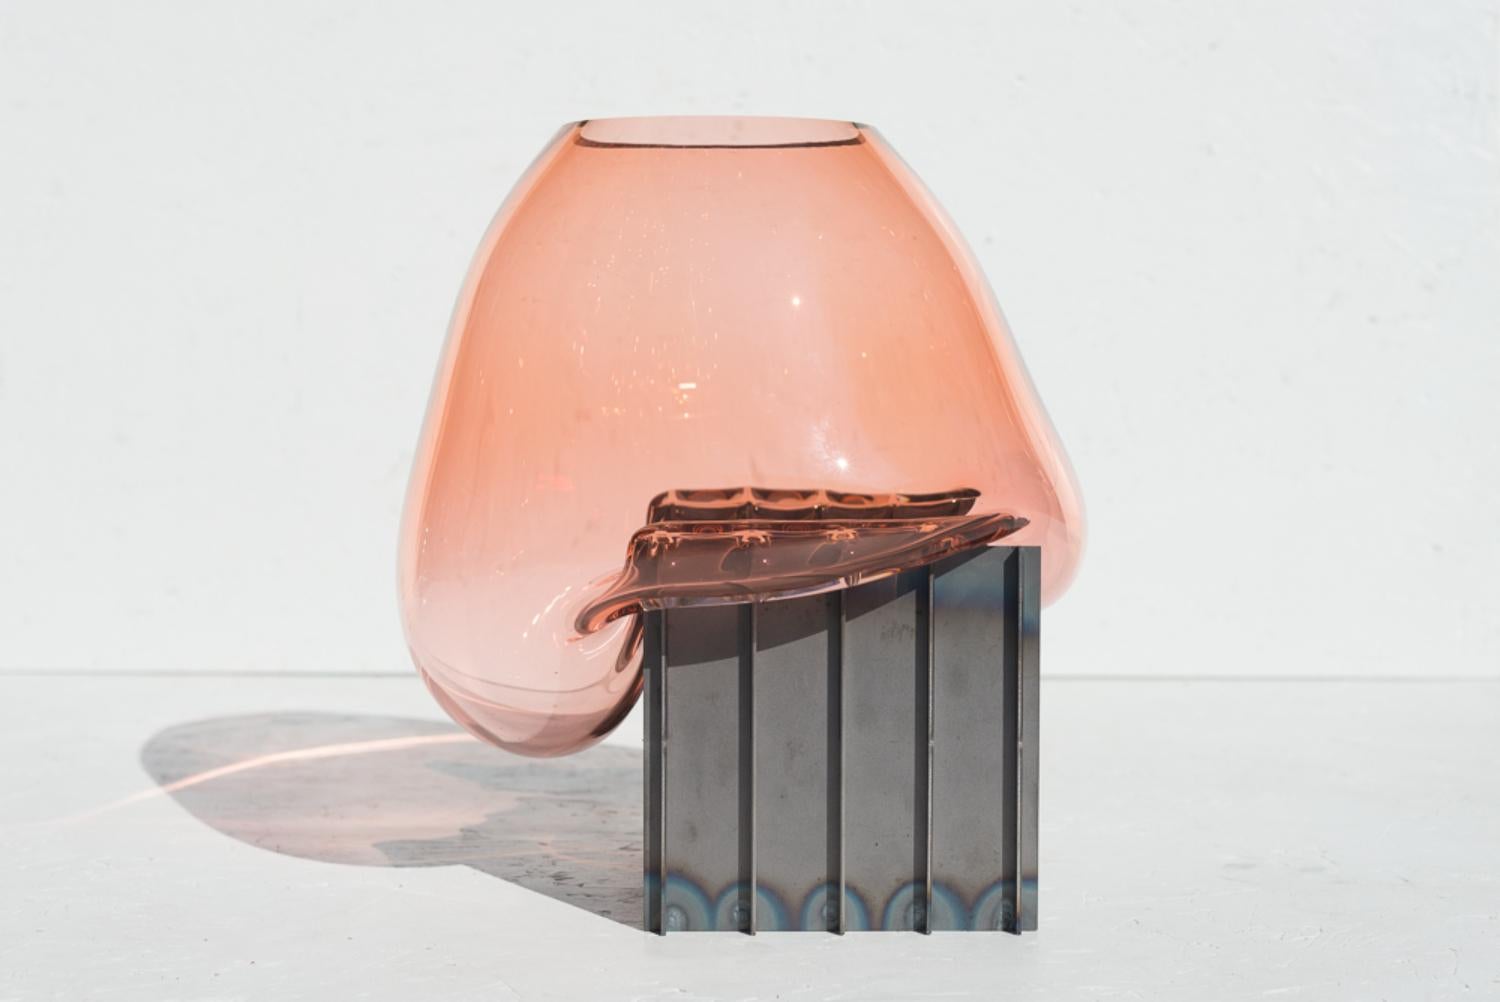 Set of 4 pink grid table vase by Studio Thier & van Daalen
Dimensions: W 30 x D 35 x H 35cm
Materials: Steel, glass

The studio was keen to find a way to display the fluidity of glass. Therefore they sought the contrast between the industrial